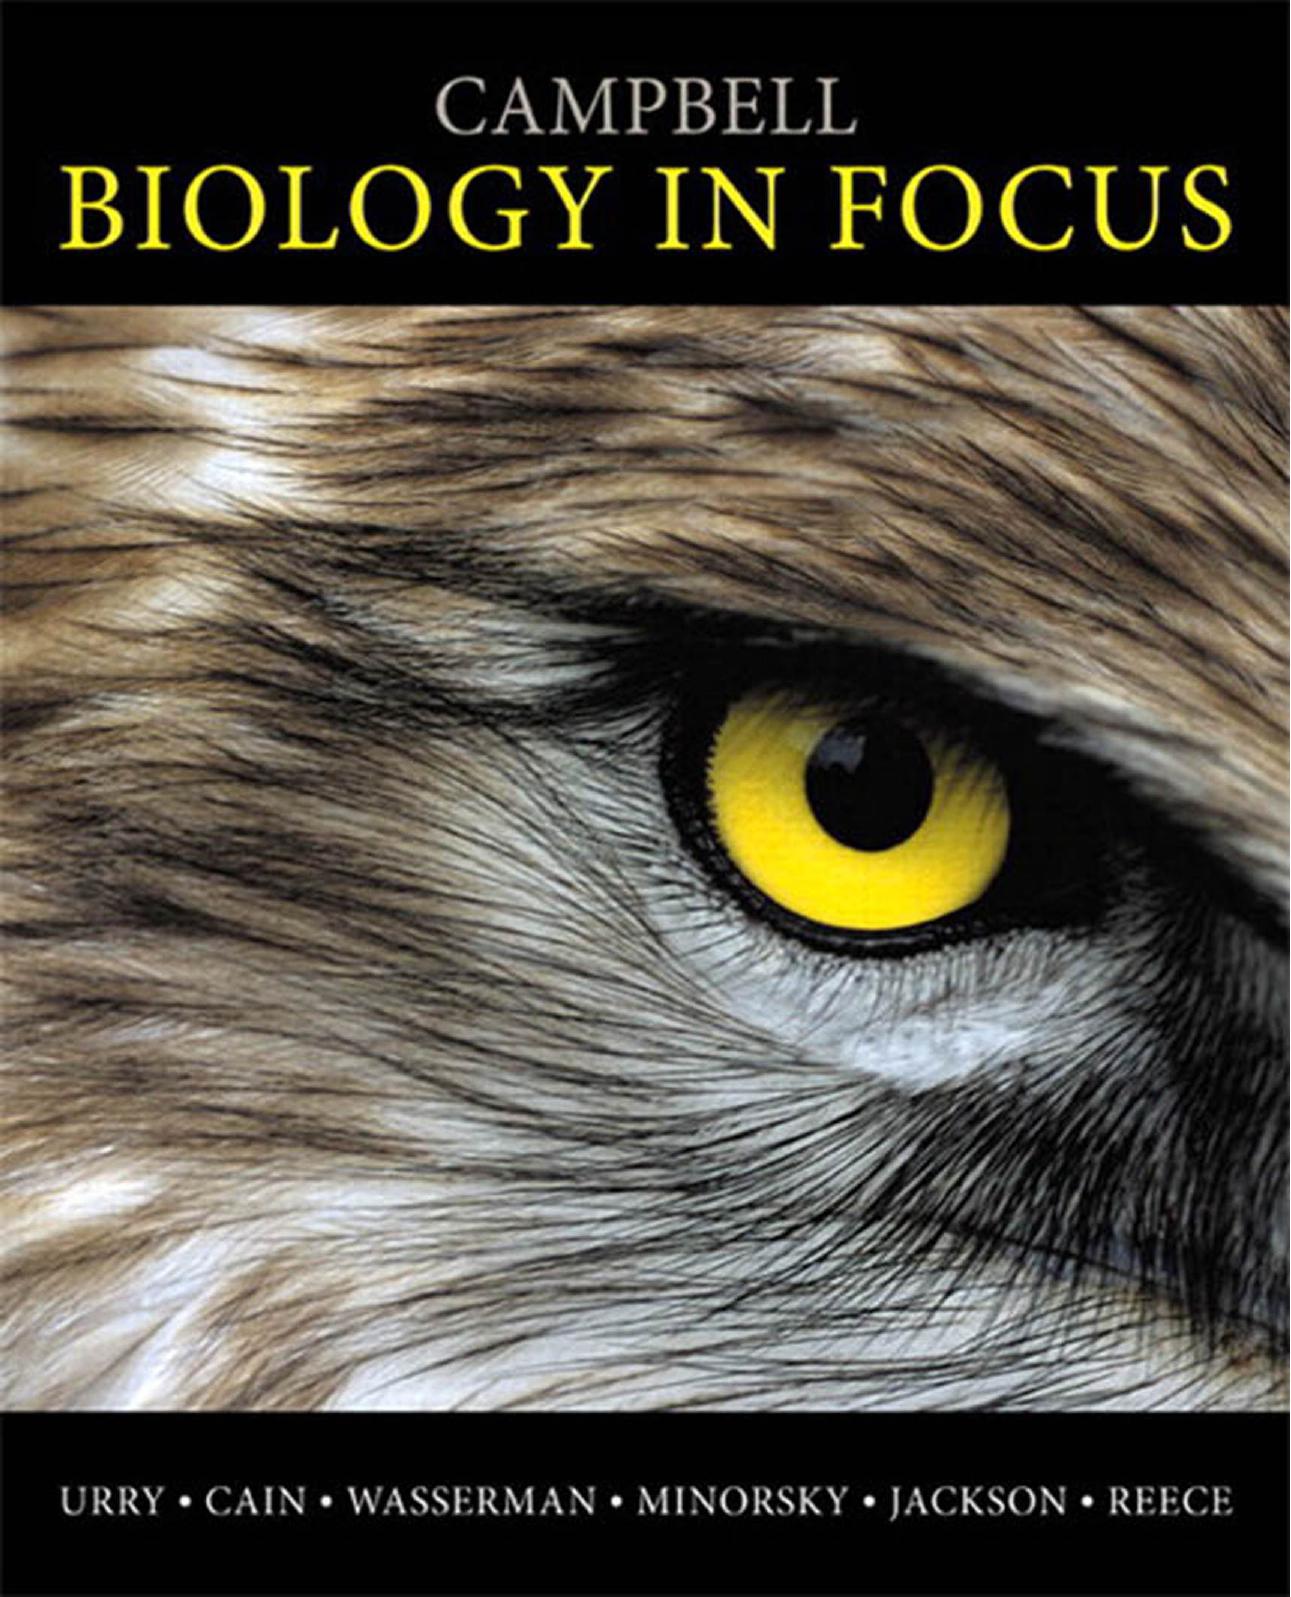 campbell biology in focus pdf download